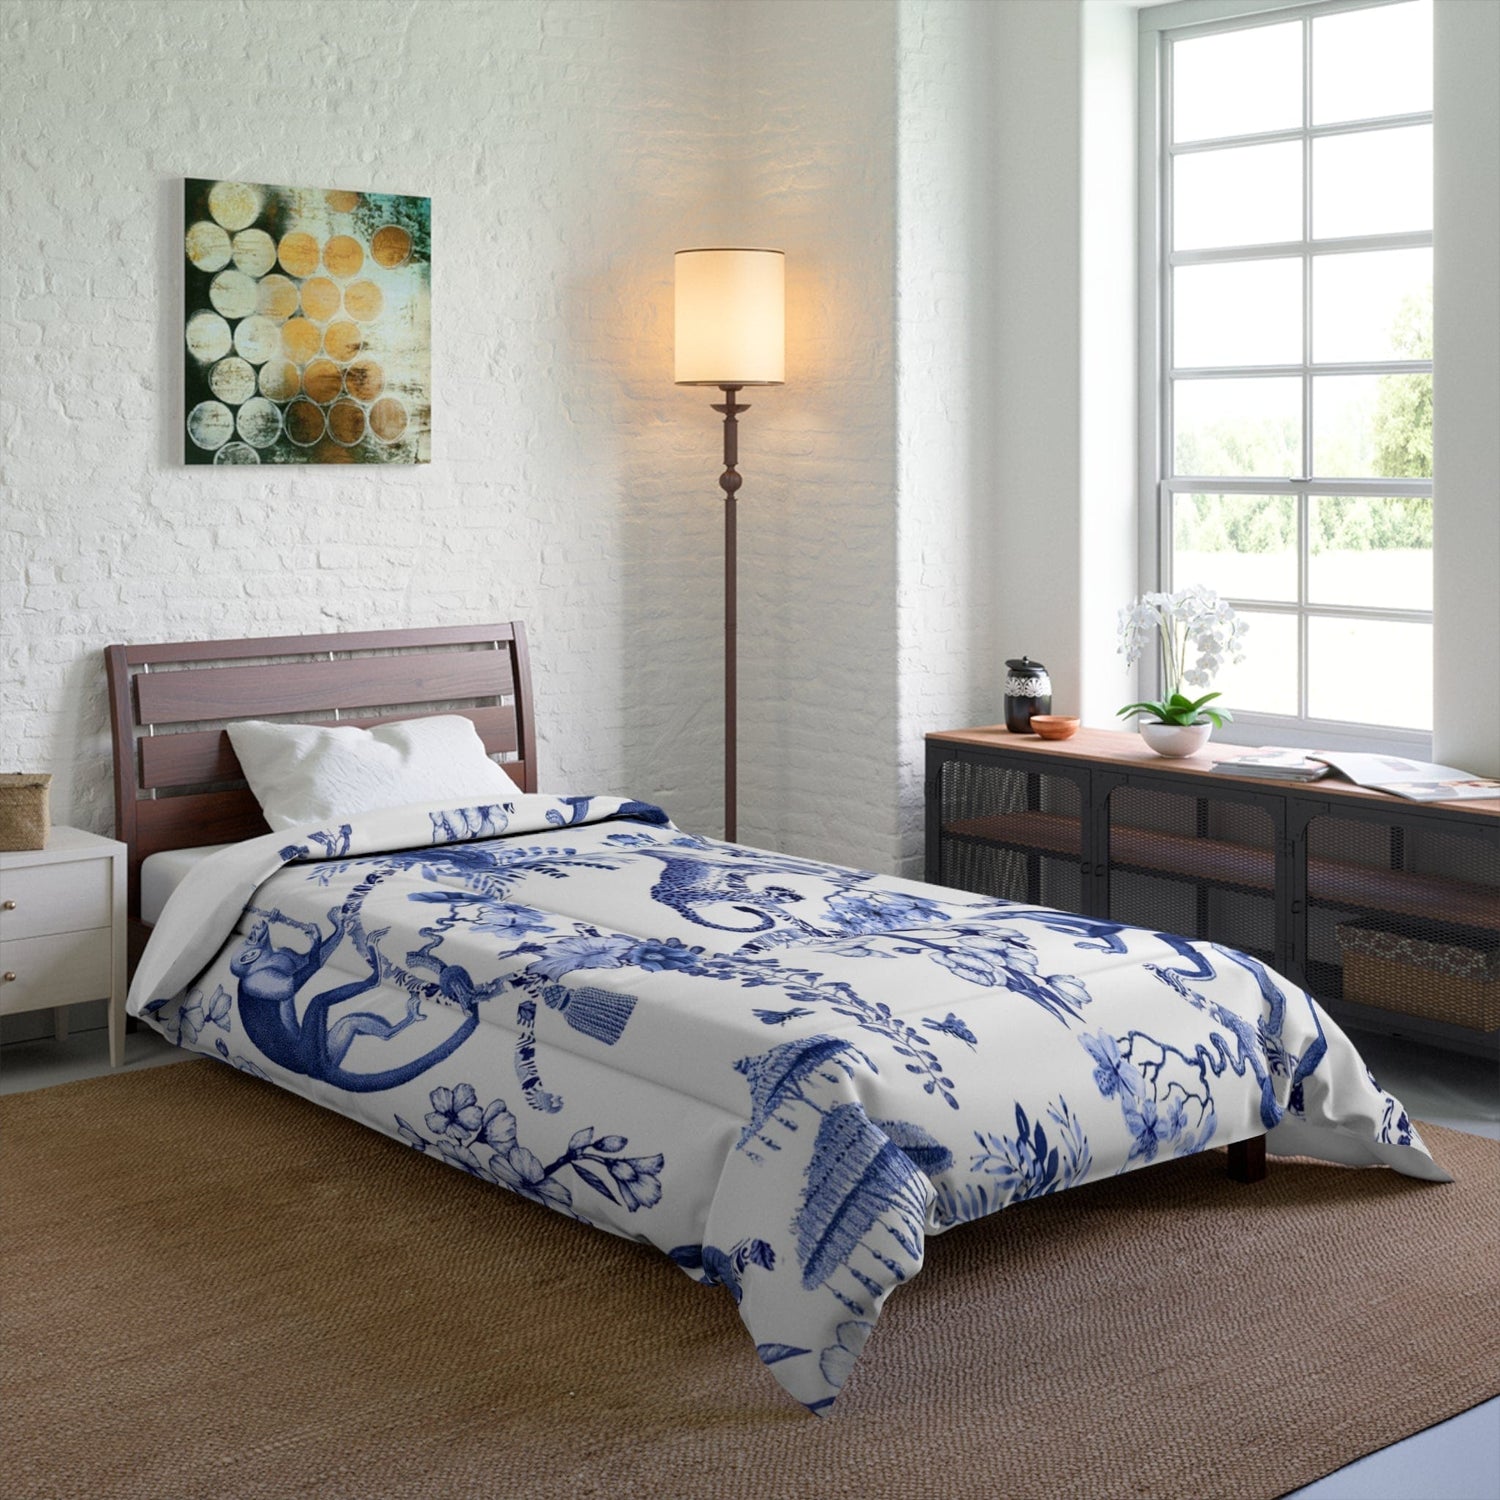 Kate McEnroe New York Floral Blue and White Chinoiserie Jungle Botanical Toile Comforter Comforters 68&quot; × 92&quot; 31736806517057842393